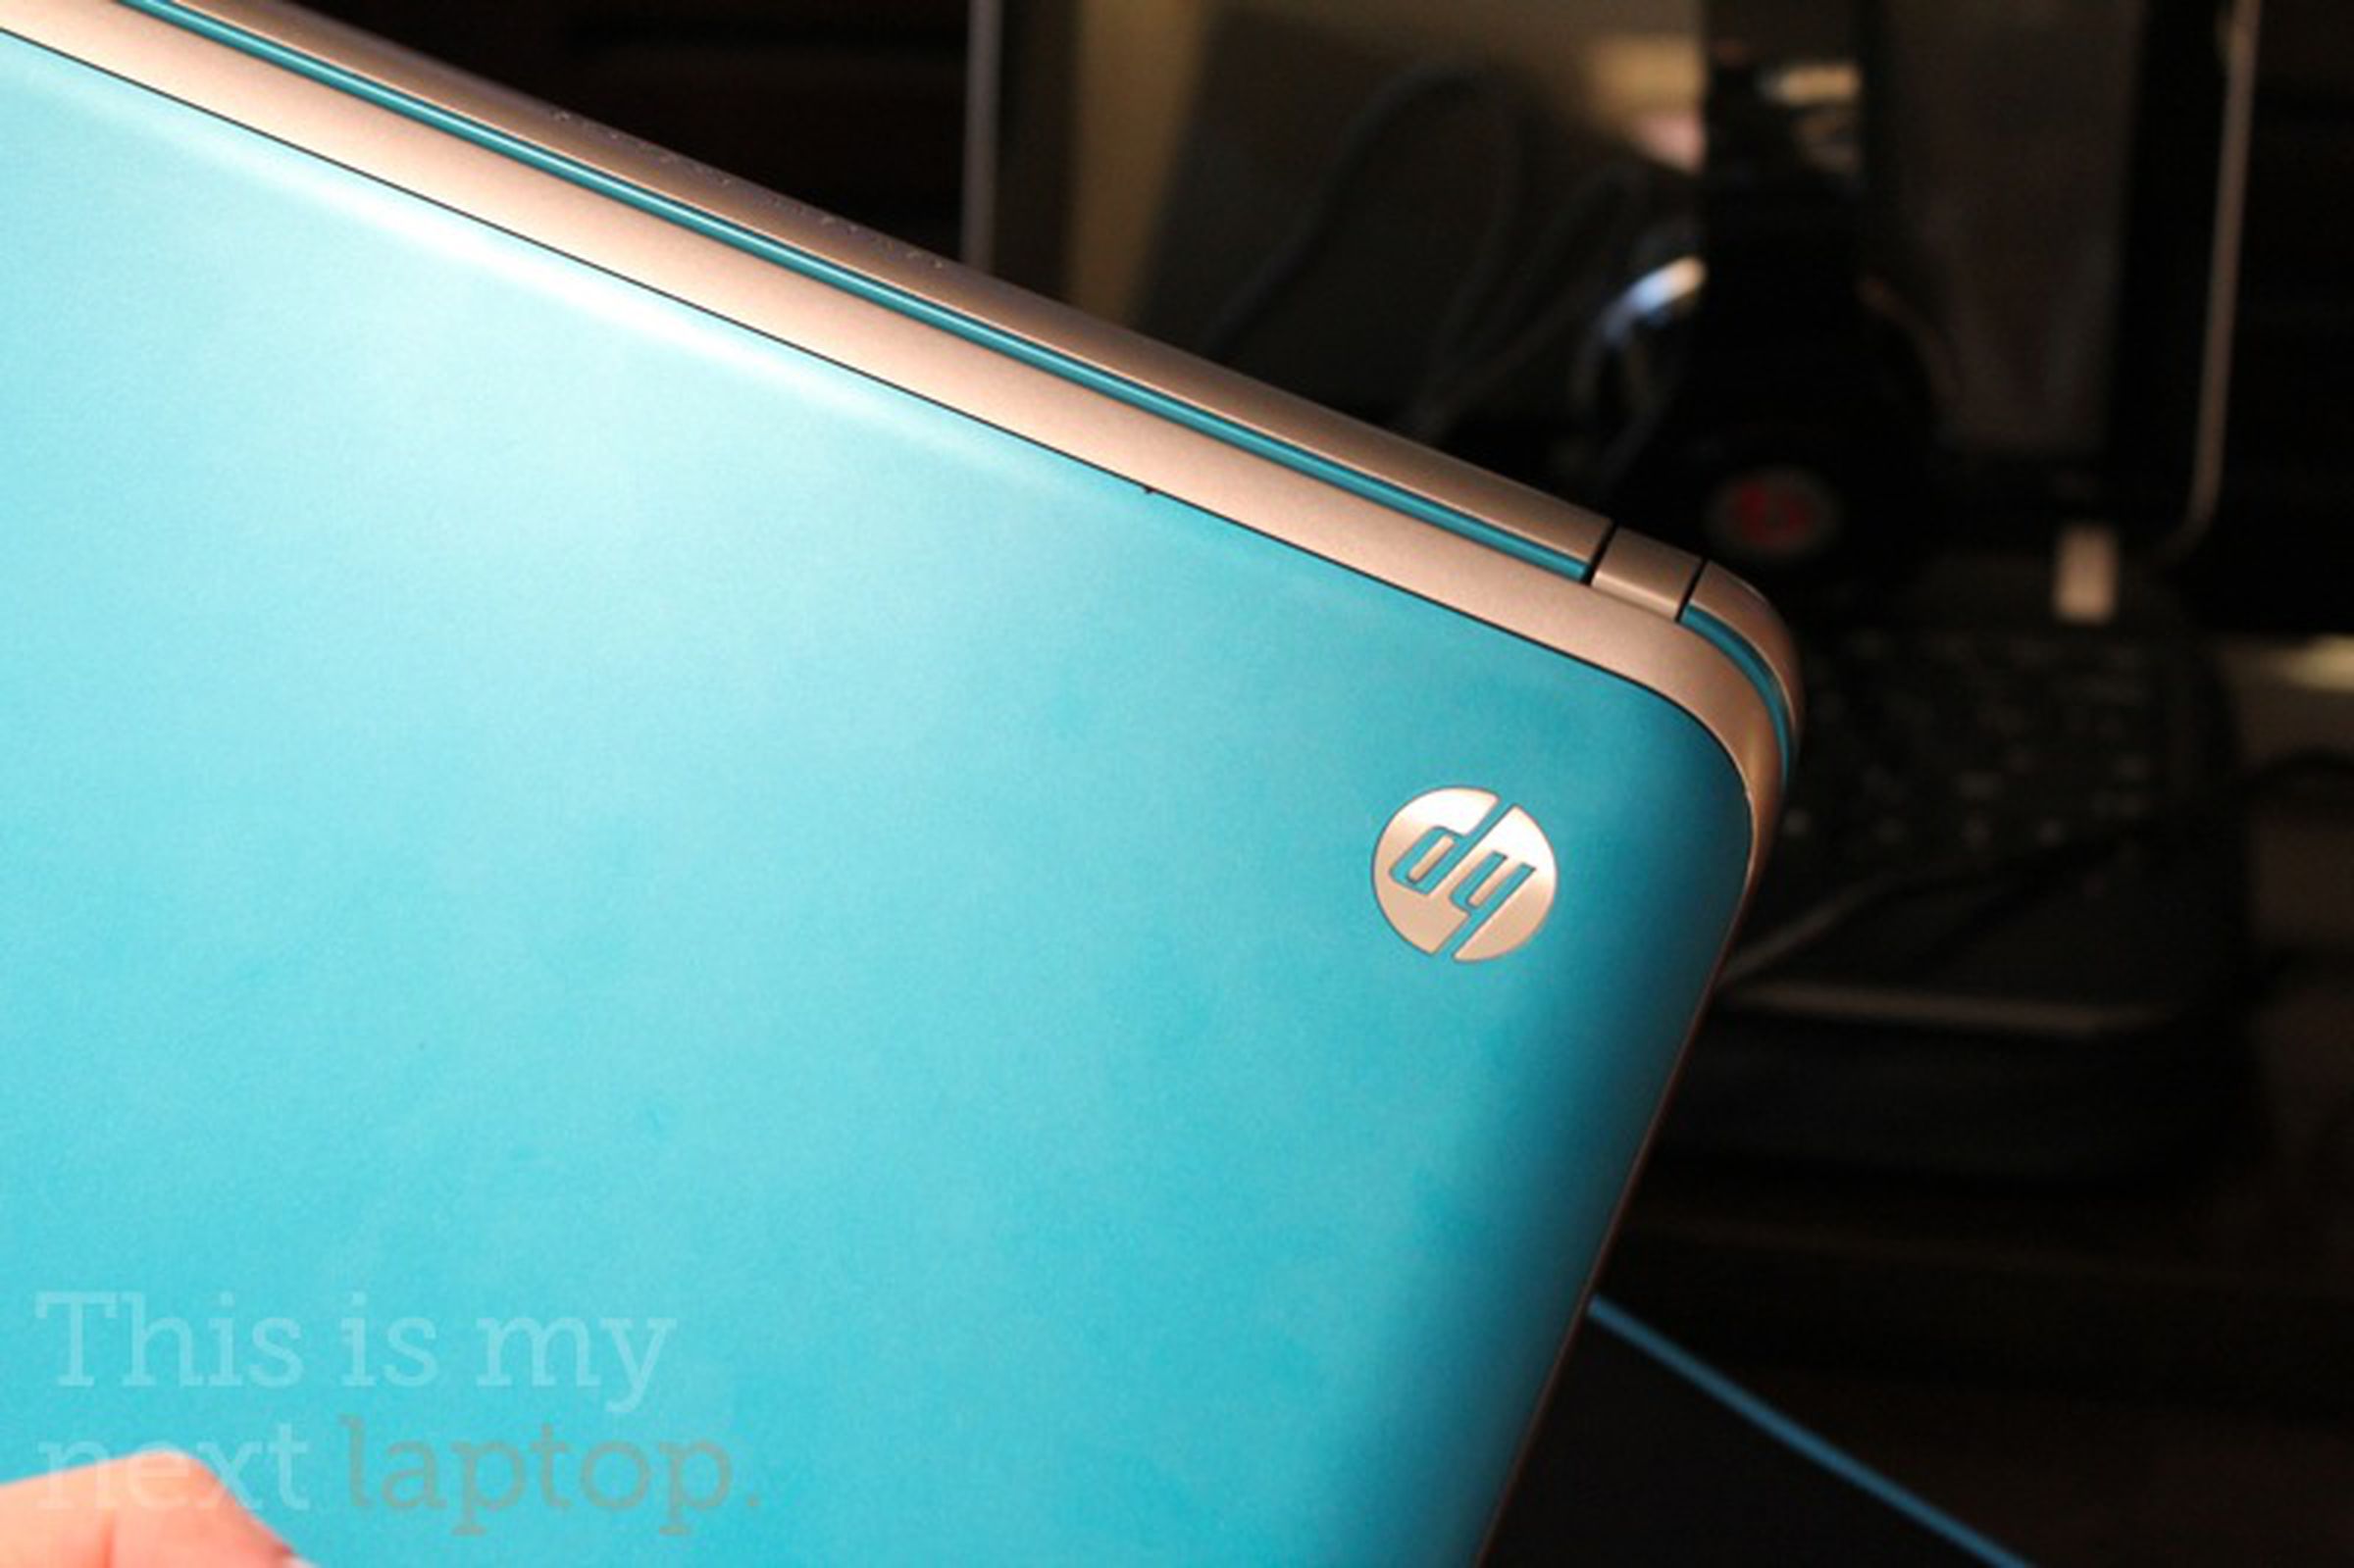 HP Mini 210 hands-on pictures